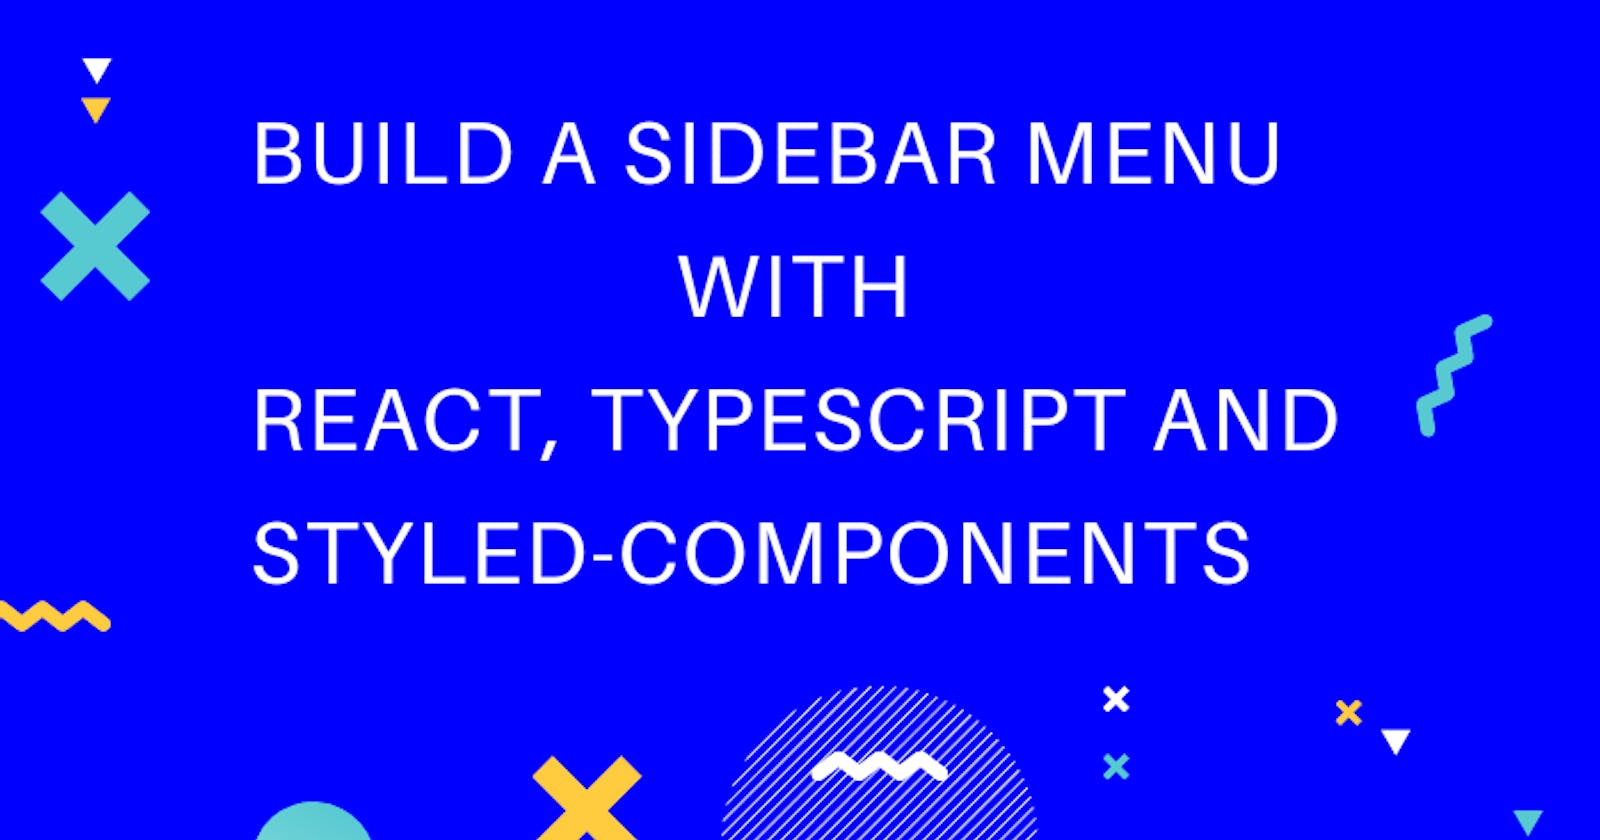 Build a Sidebar Menu with React, Typescript and Styled Components